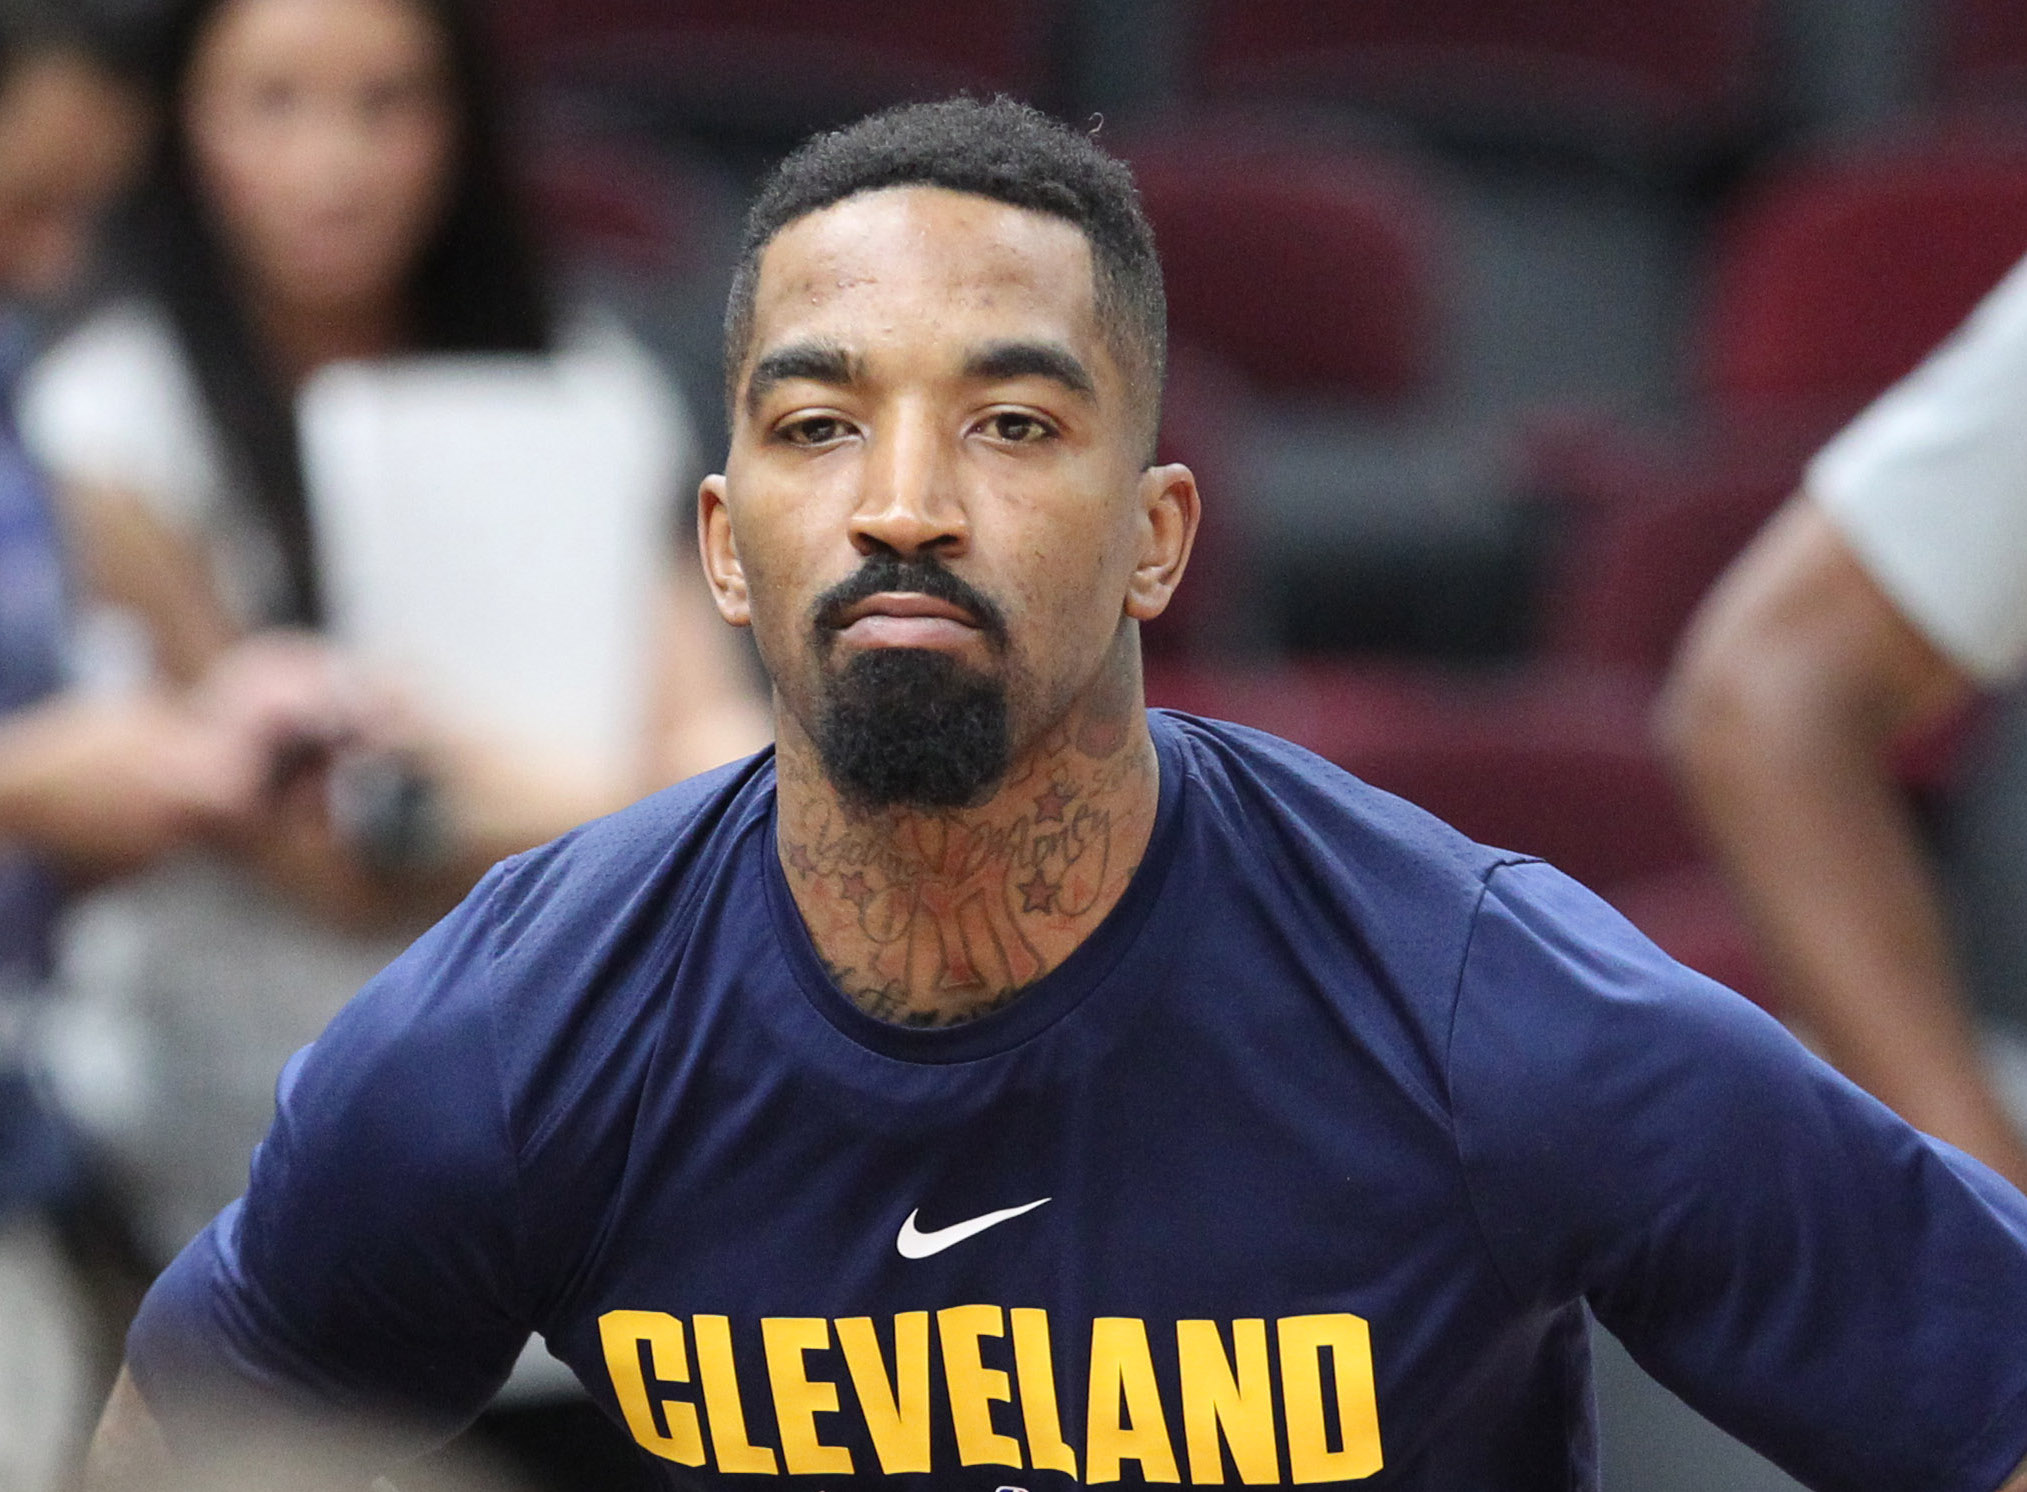 Cavaliers' J.R. Smith charged with breaking fan's phone - NBC Sports